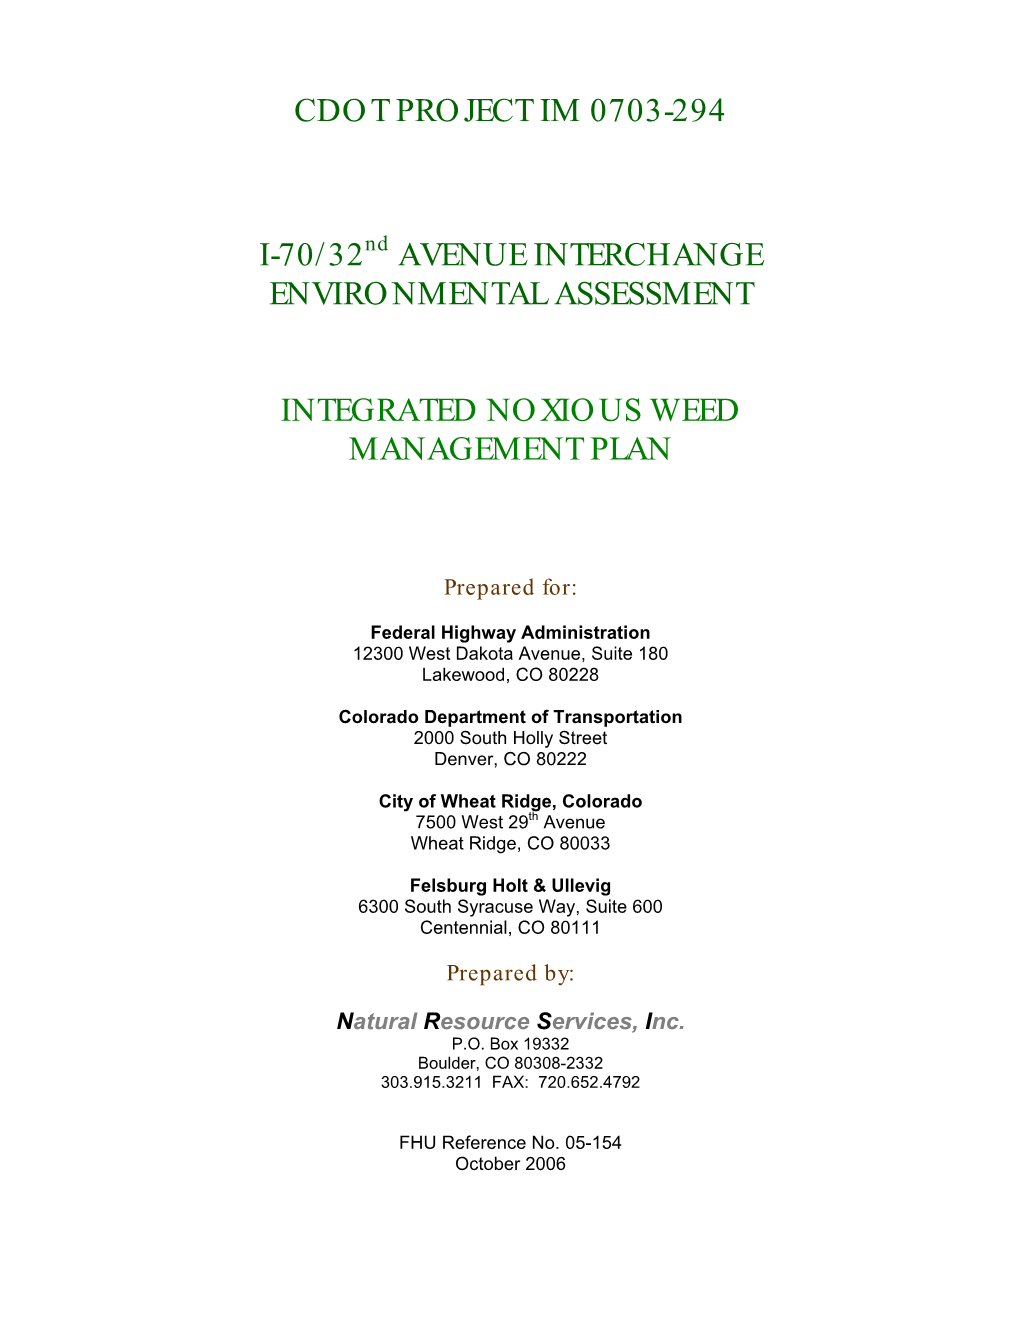 CDOT PROJECT IM 0703-294 I-70/32Nd AVENUE INTERCHANGE ENVIRONMENTAL ASSESSMENT INTEGRATED NOXIOUS WEED MANAGEMENT PLAN